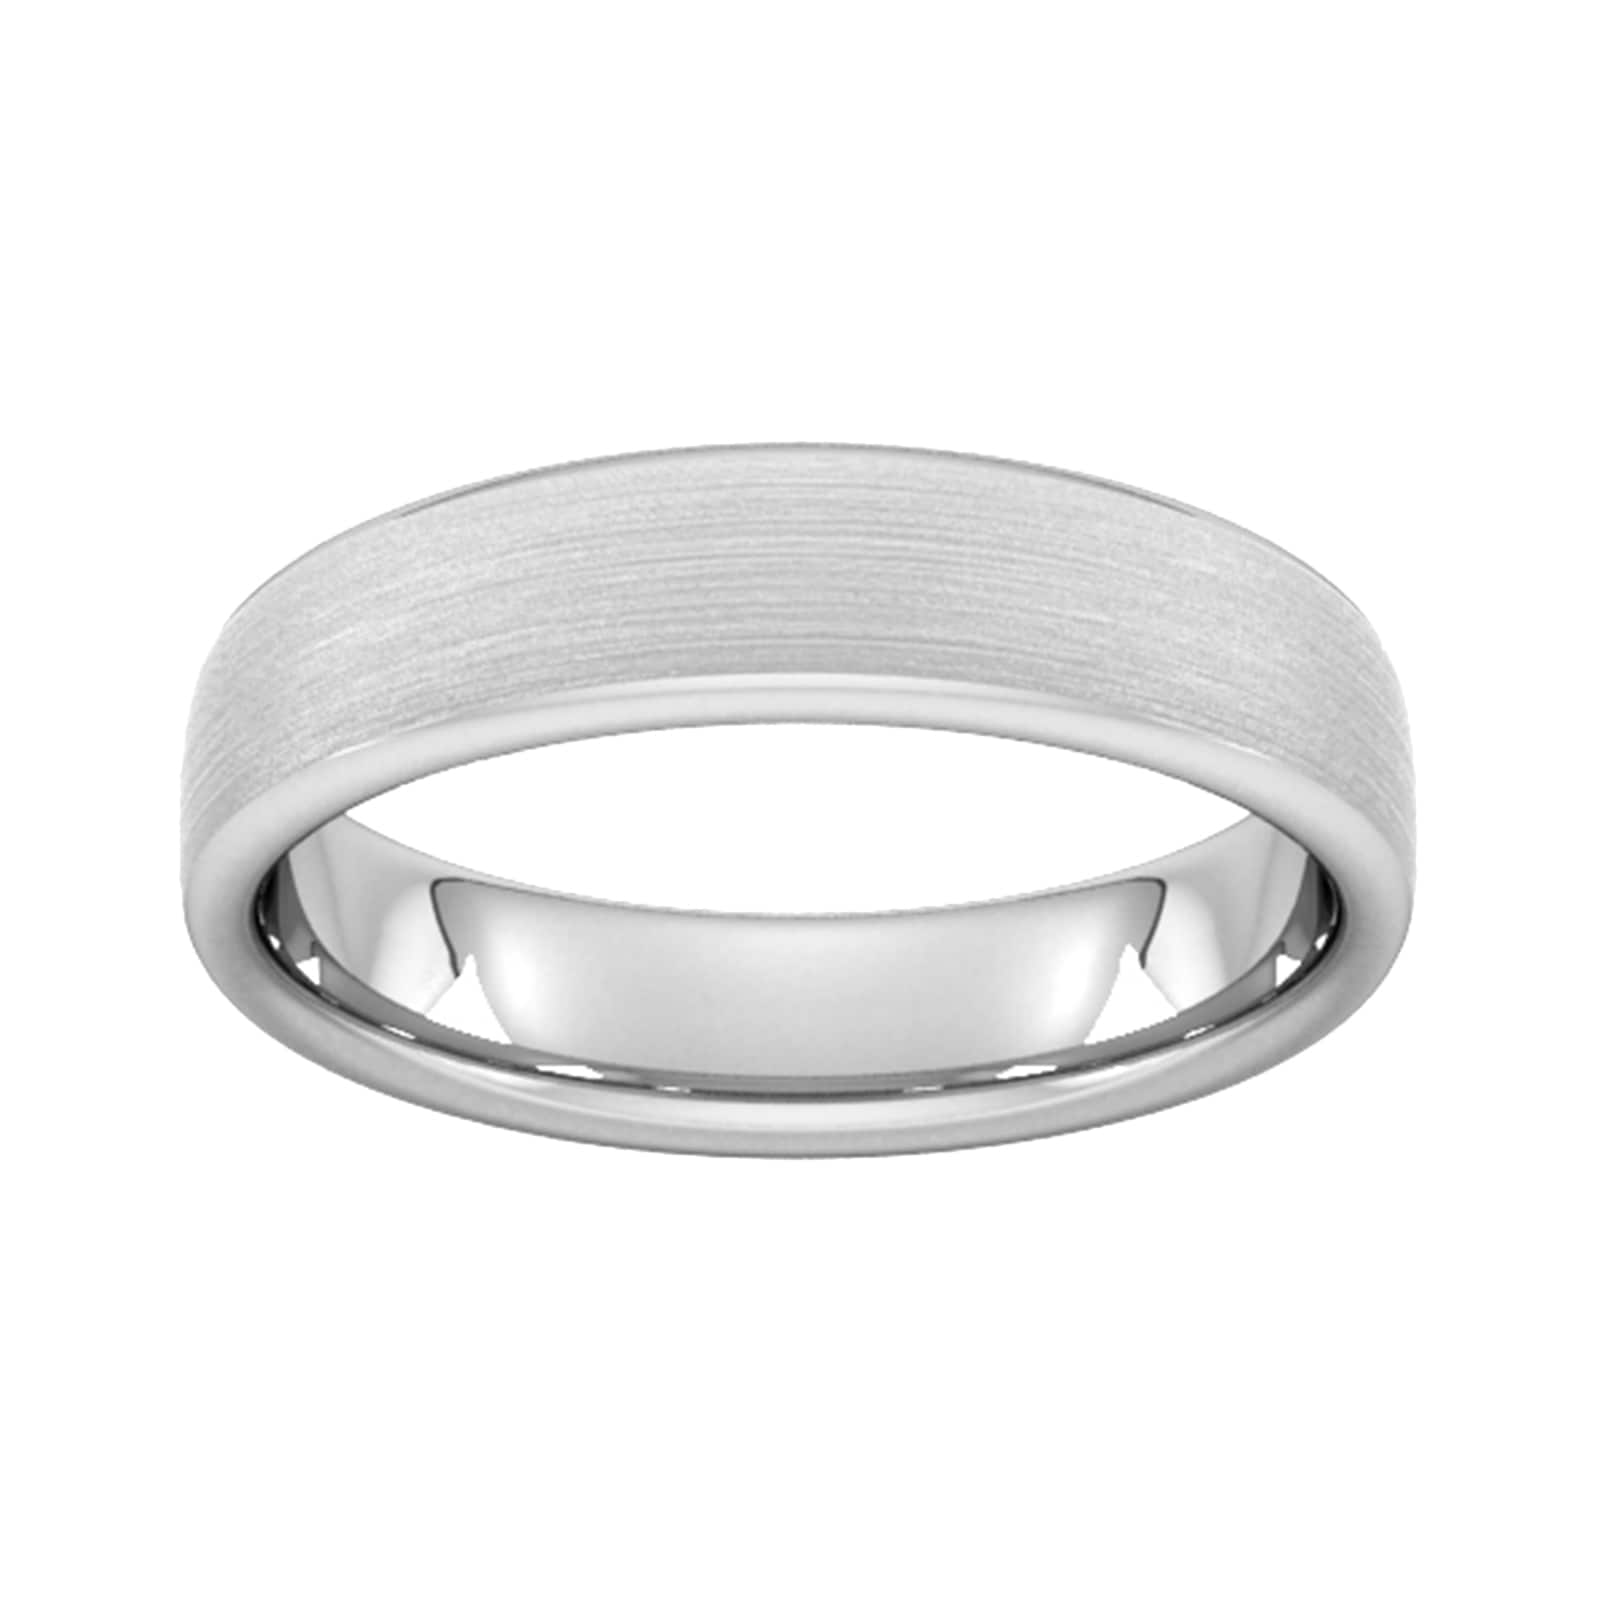 5mm Traditional Court Standard Matt Finished Wedding Ring In 9 Carat White Gold - Ring Size H